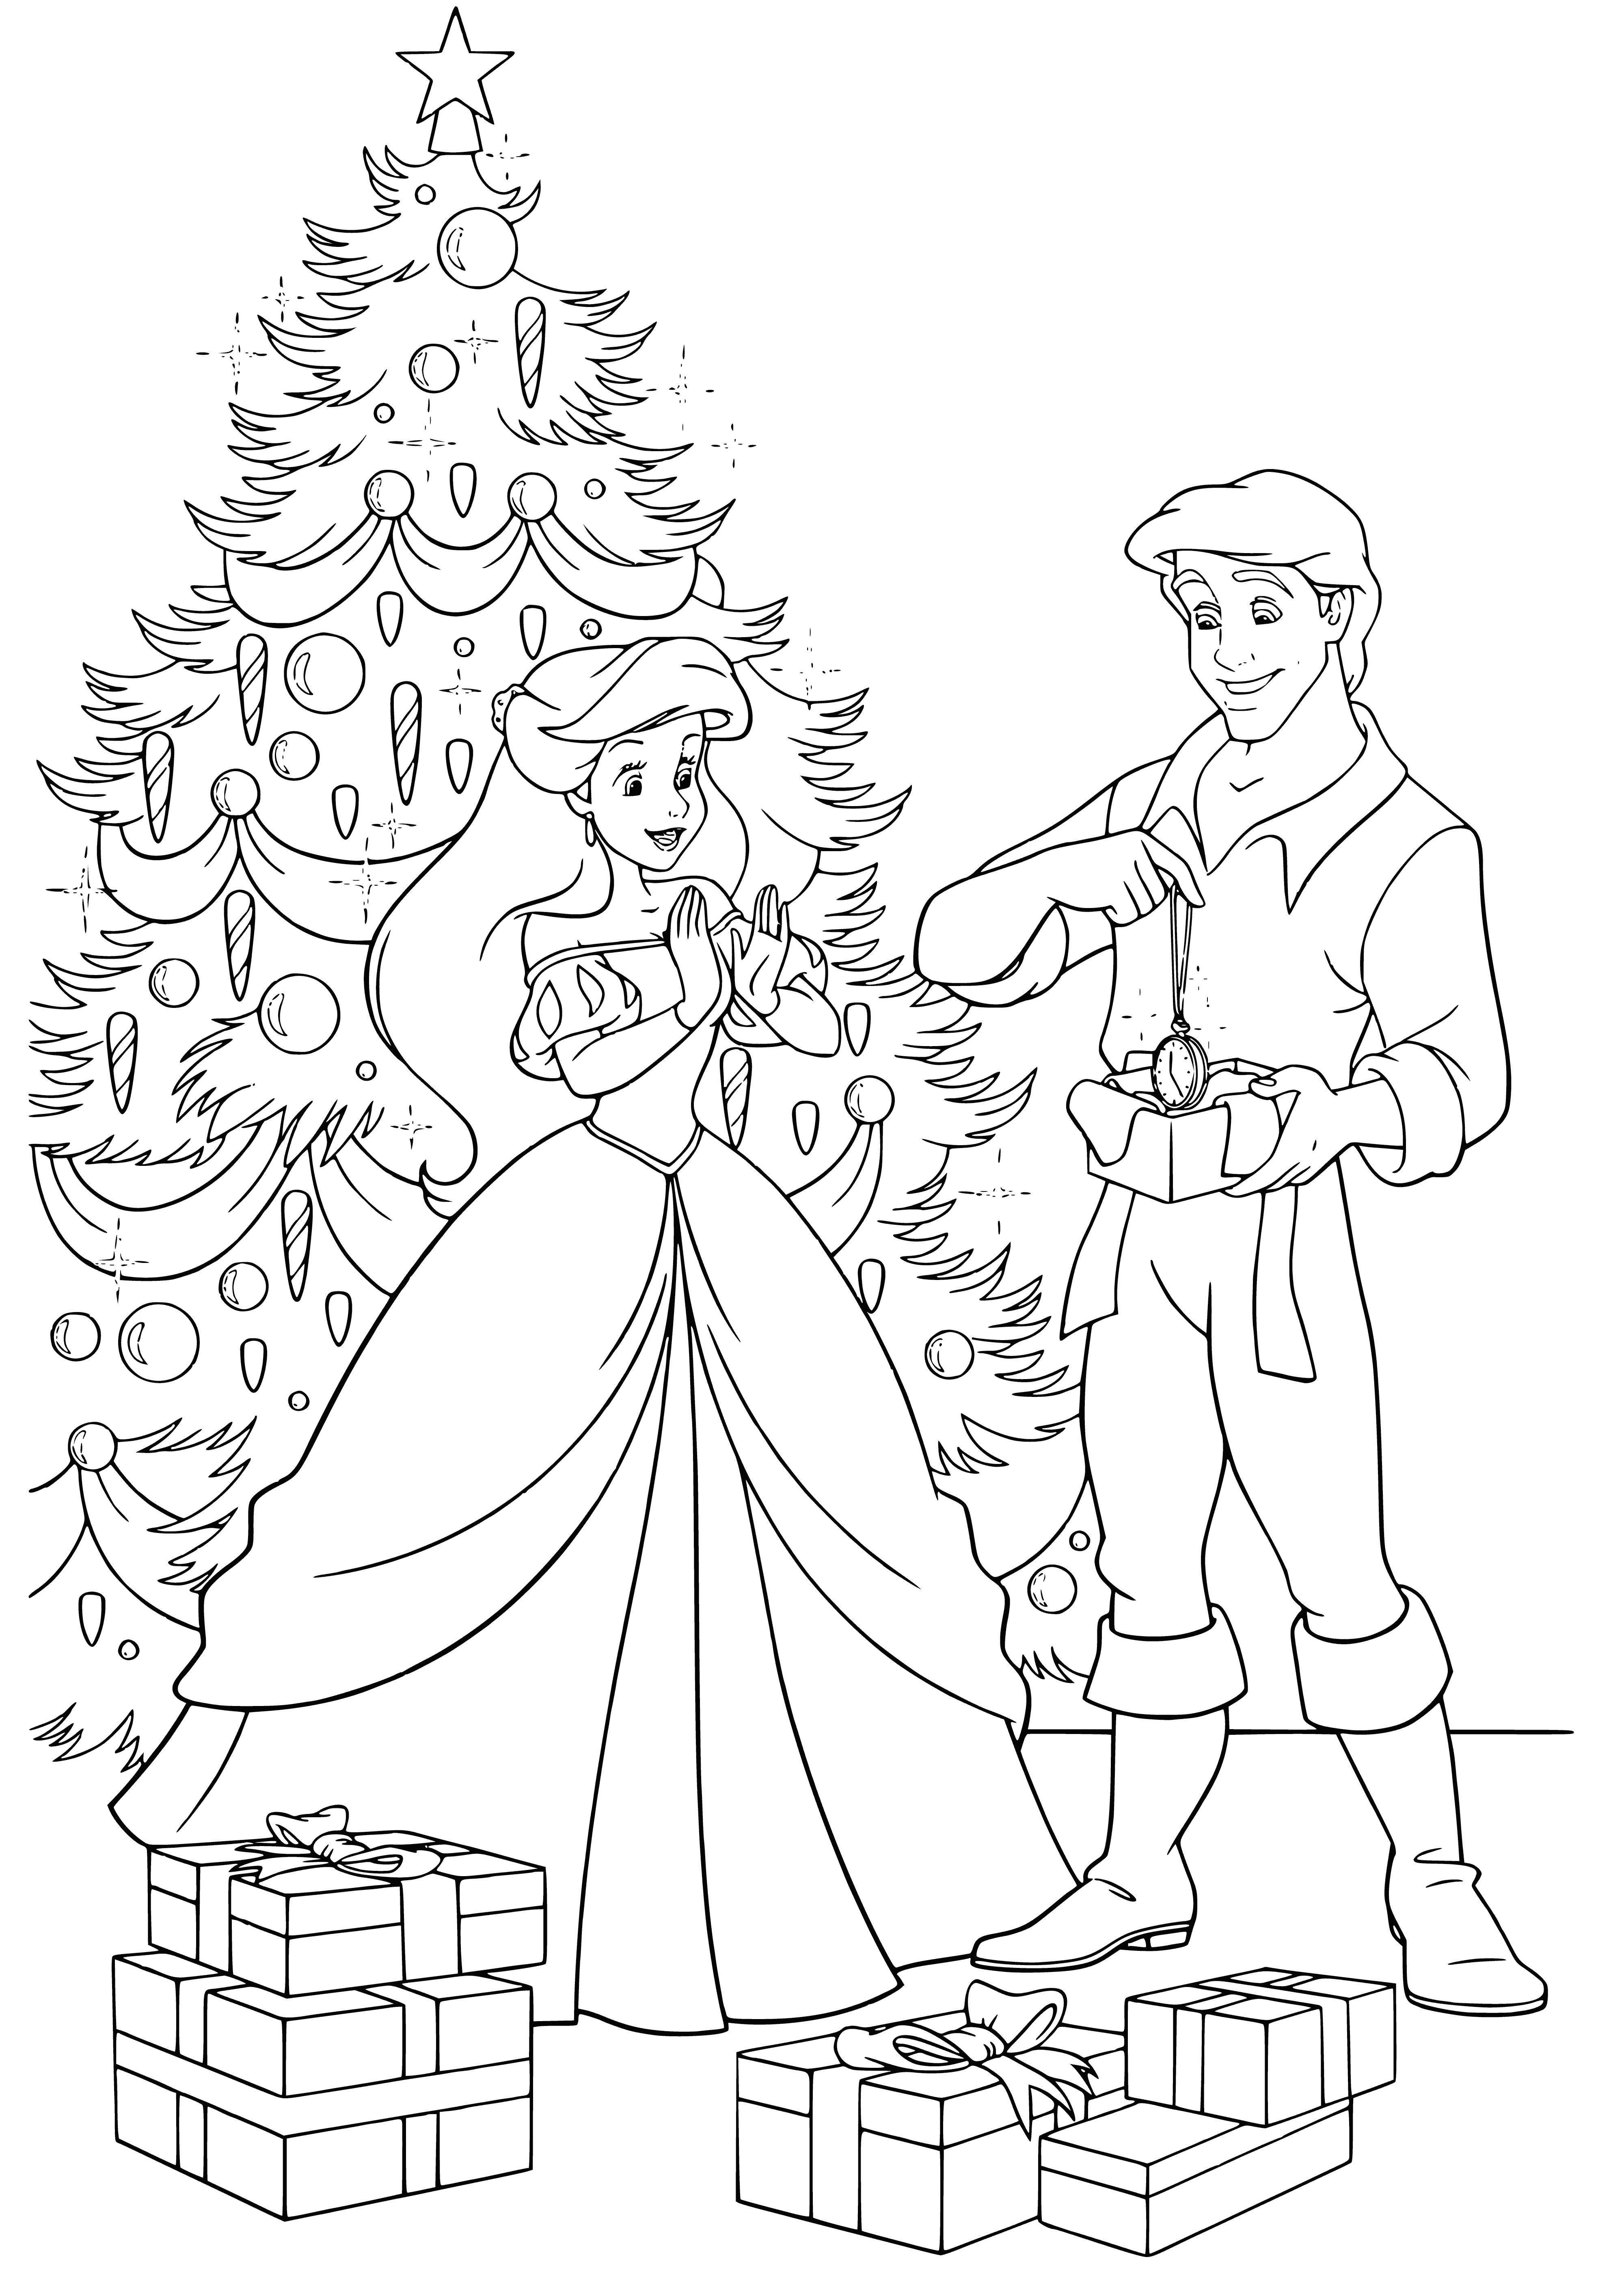 Prince Eric and Princess Ariel in New Year coloring page